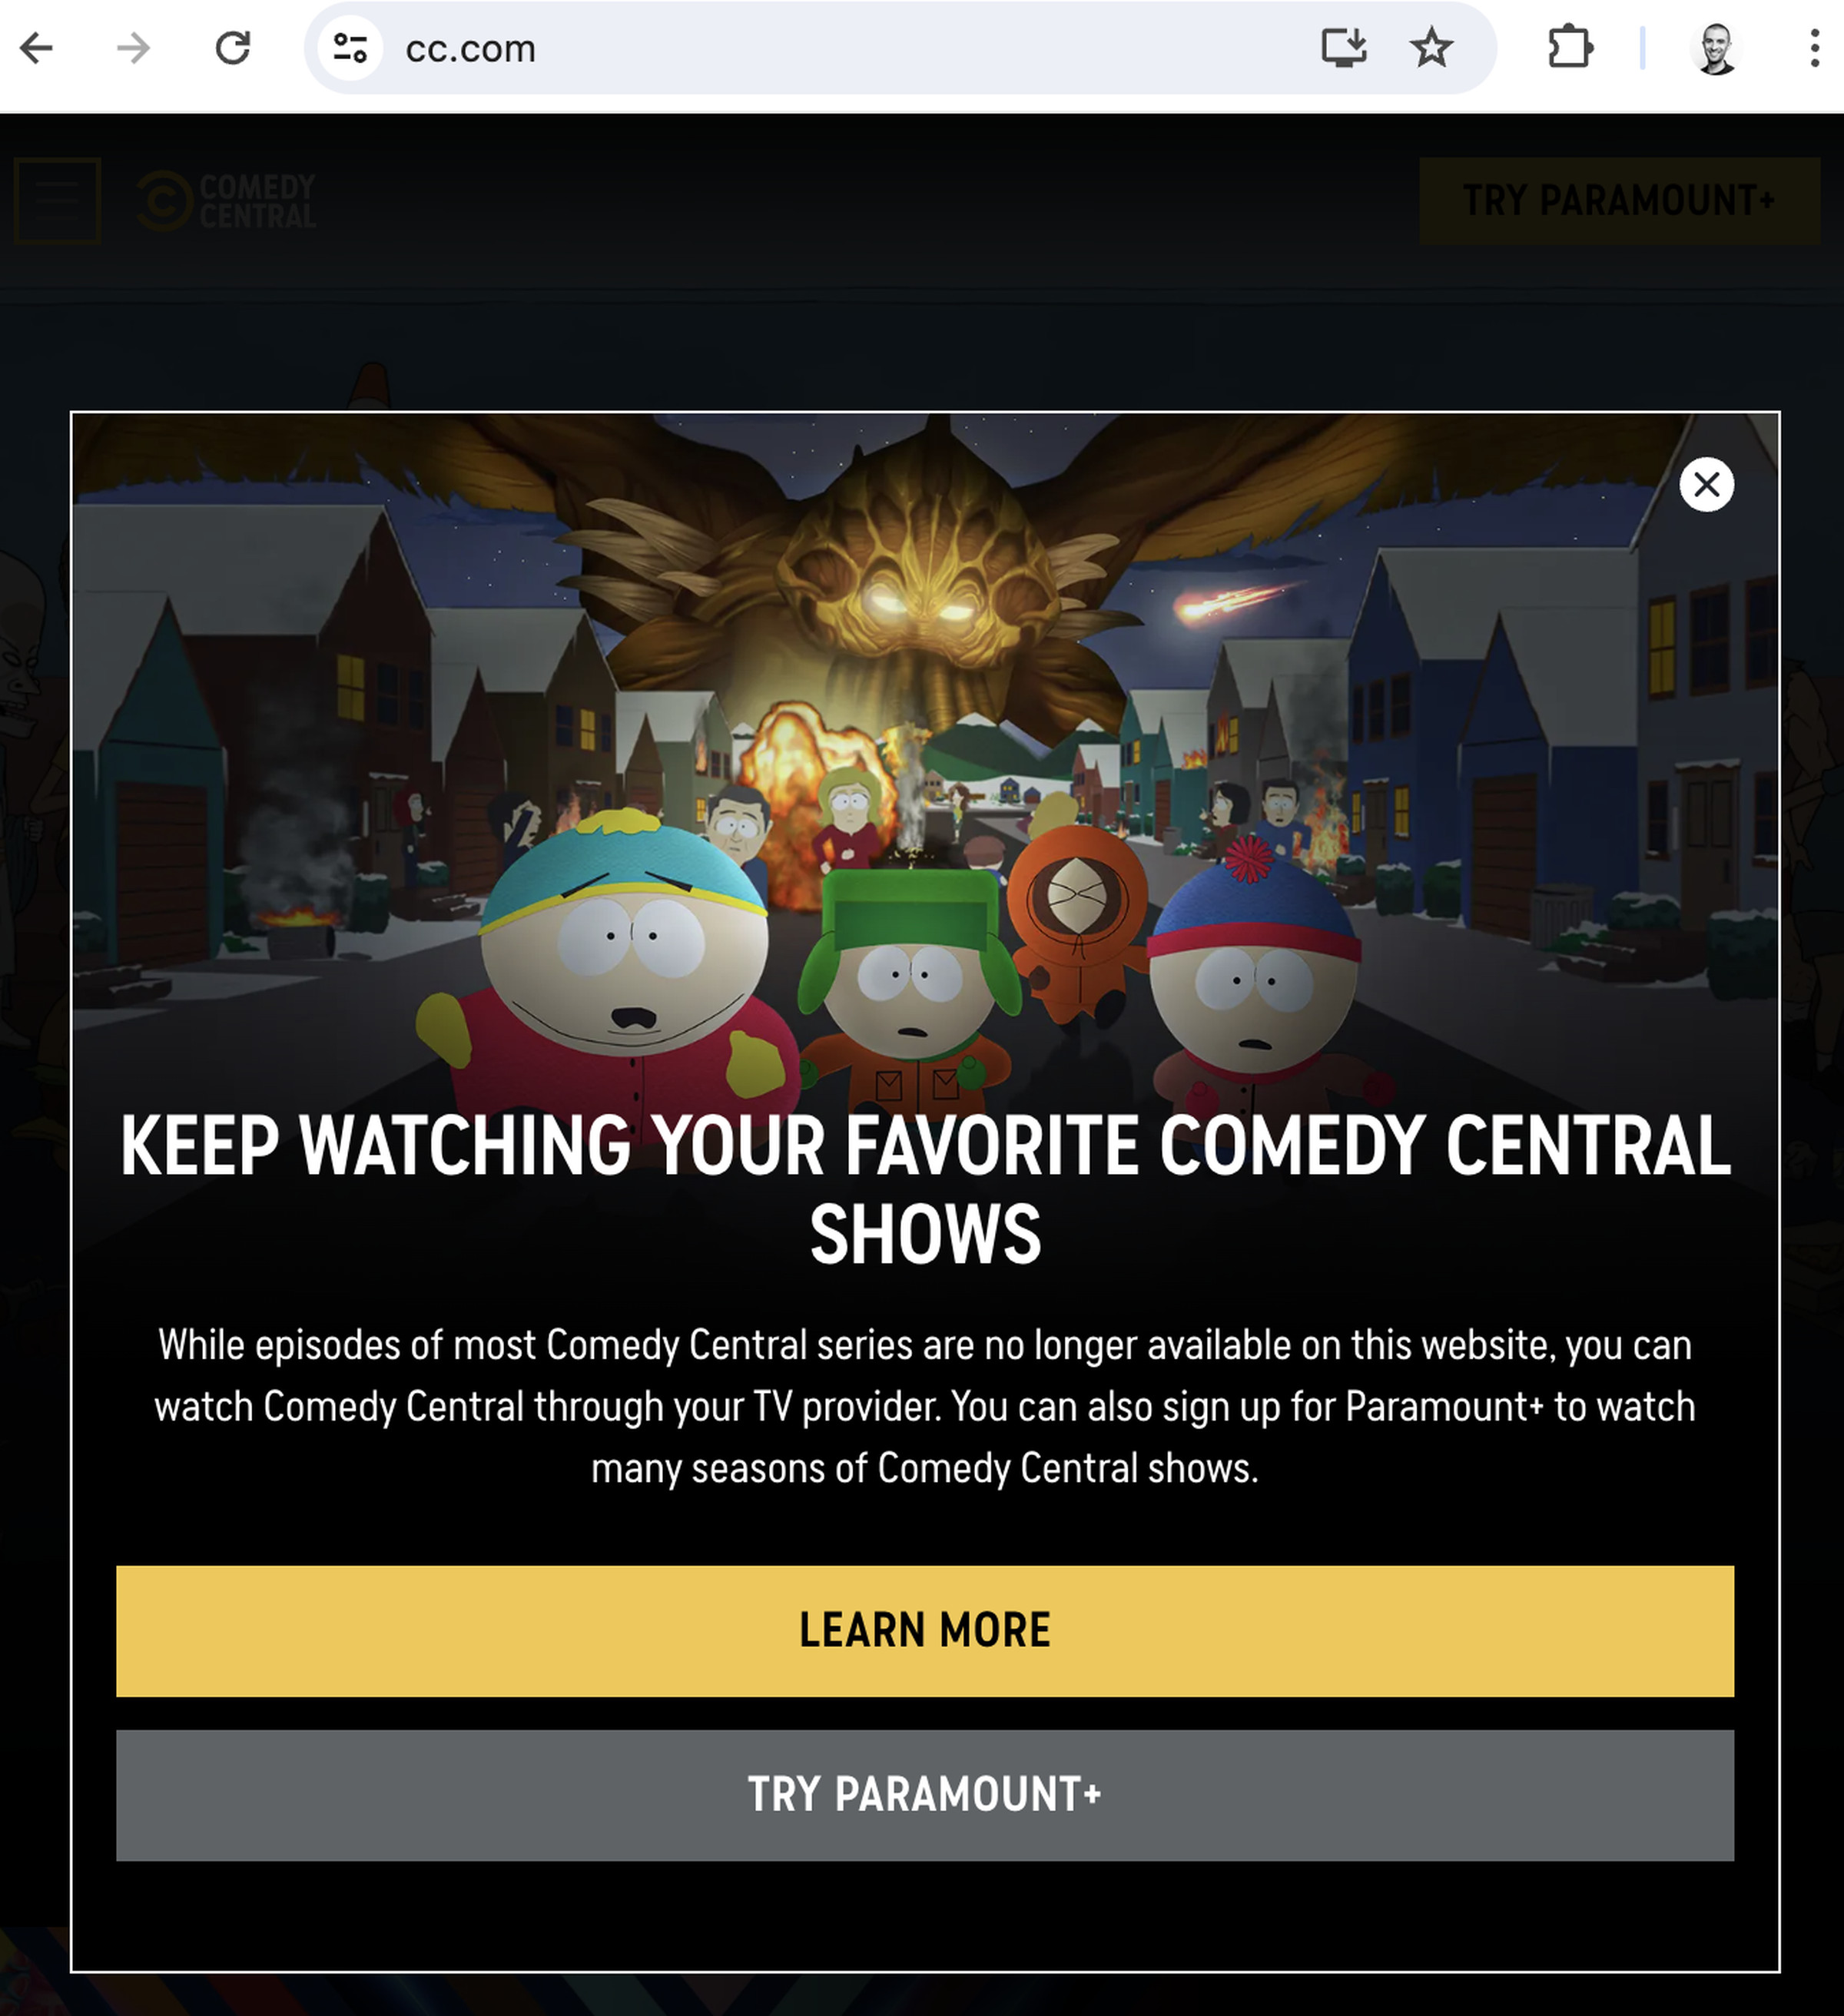 A screenshot of a notice on Comedy Central’s website.